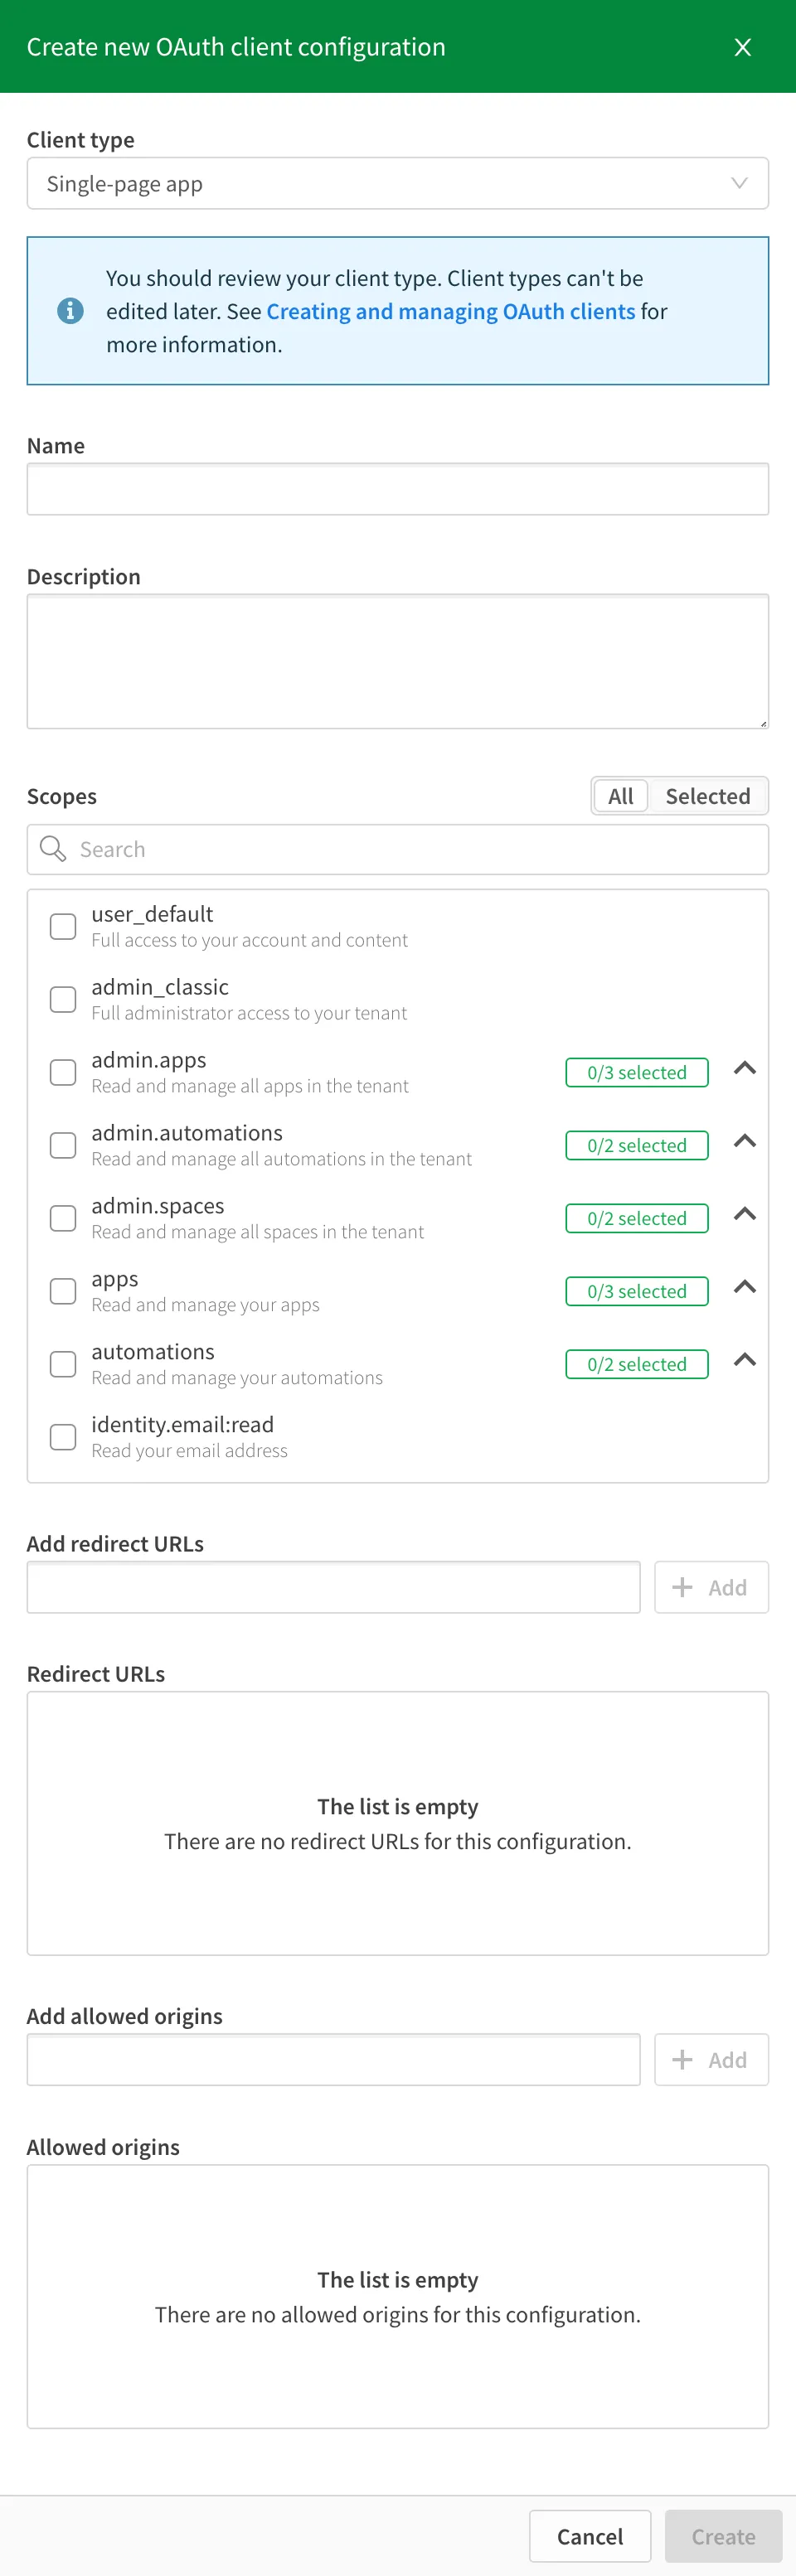 a screenshot of the configuration options for a SPA OAuth2 client